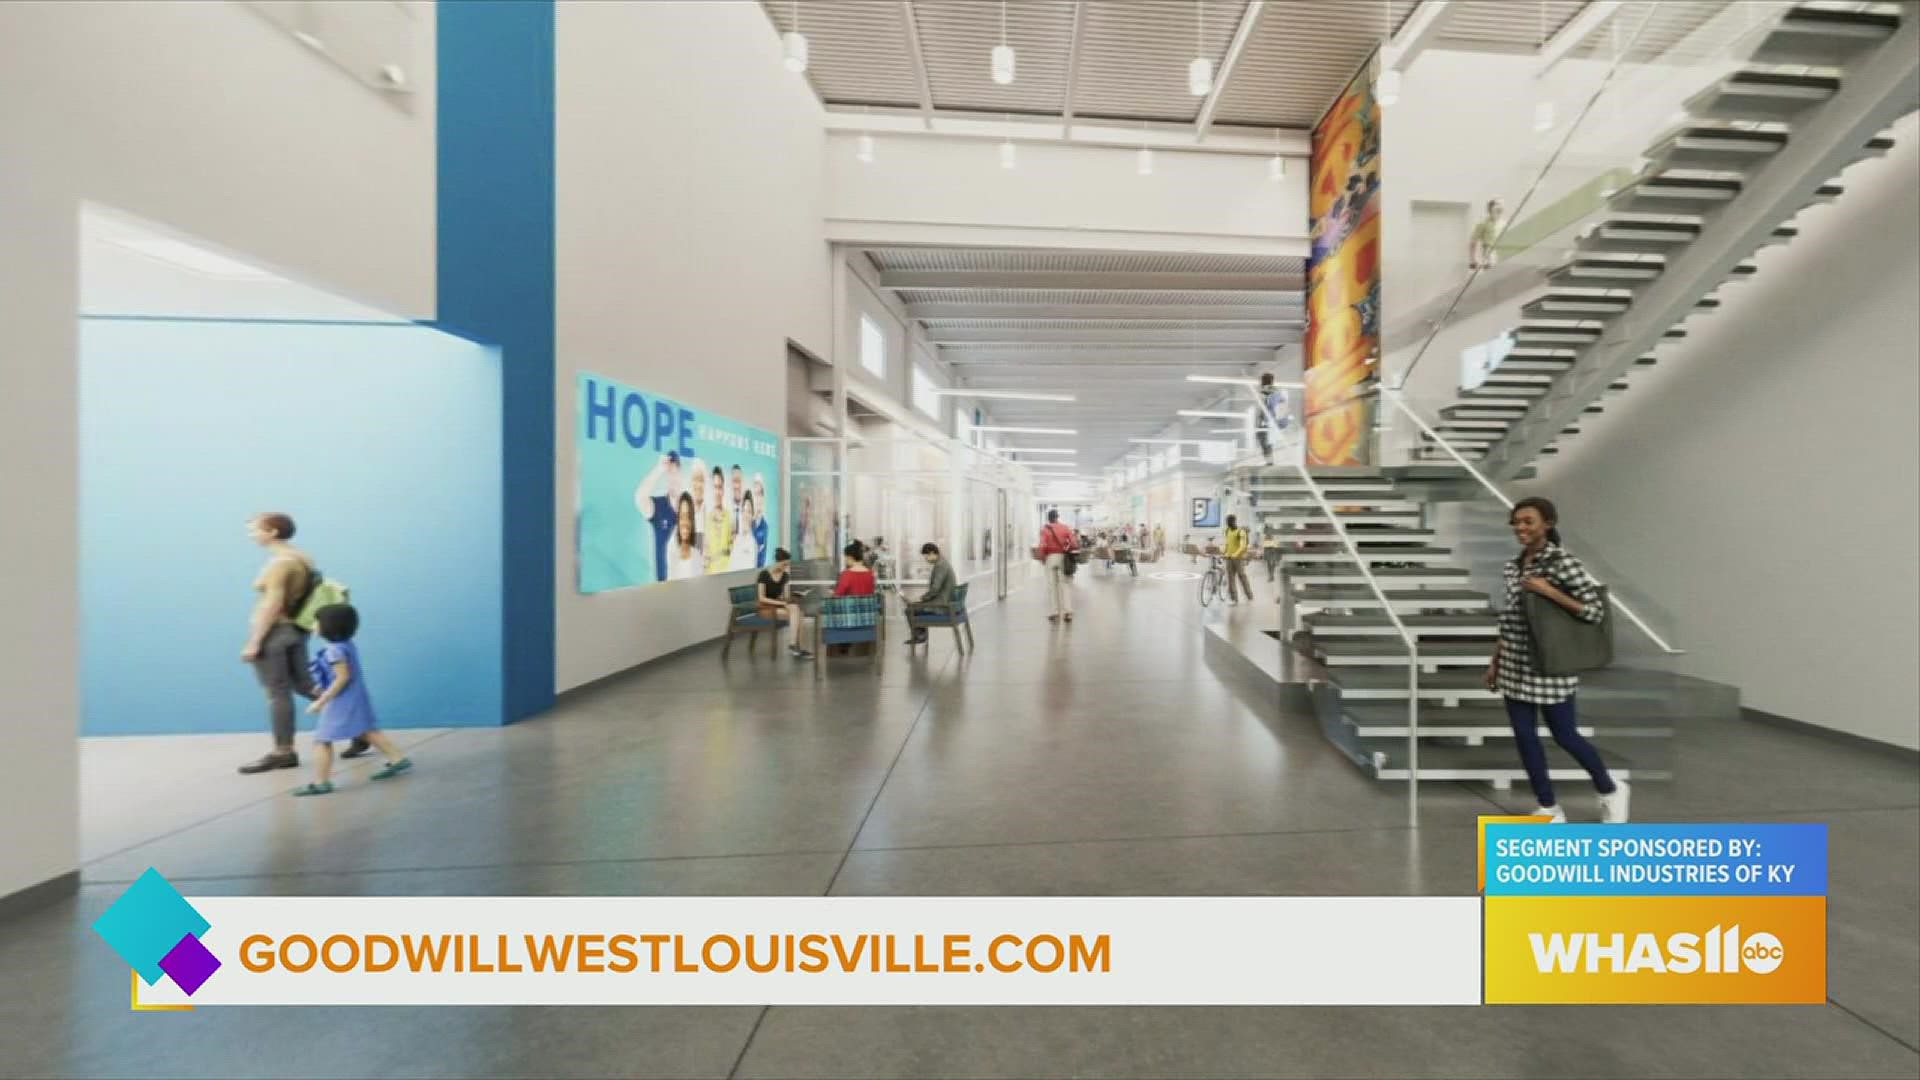 Find out what is planned for the Opportunity Campus and what can be available for you! For more information visit Goodwillwestlouisville.com